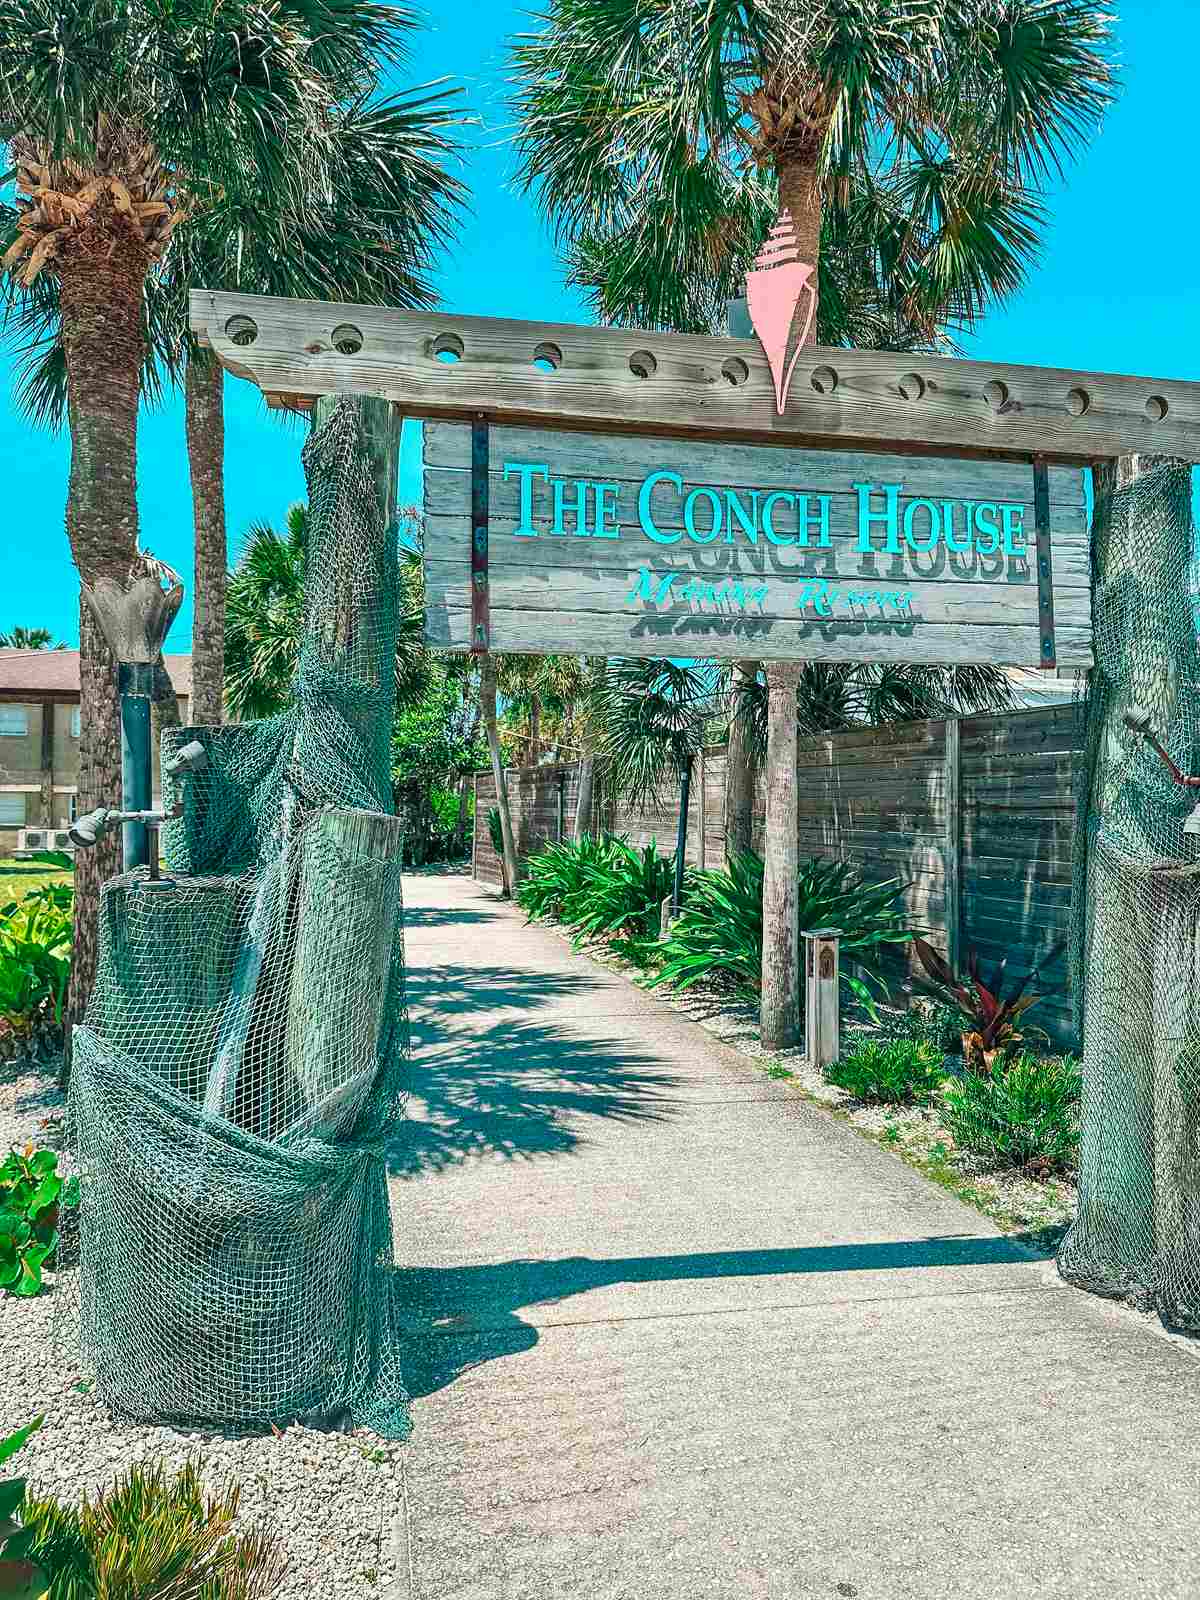 Entrance to The Conch House St. Augustine restaurant